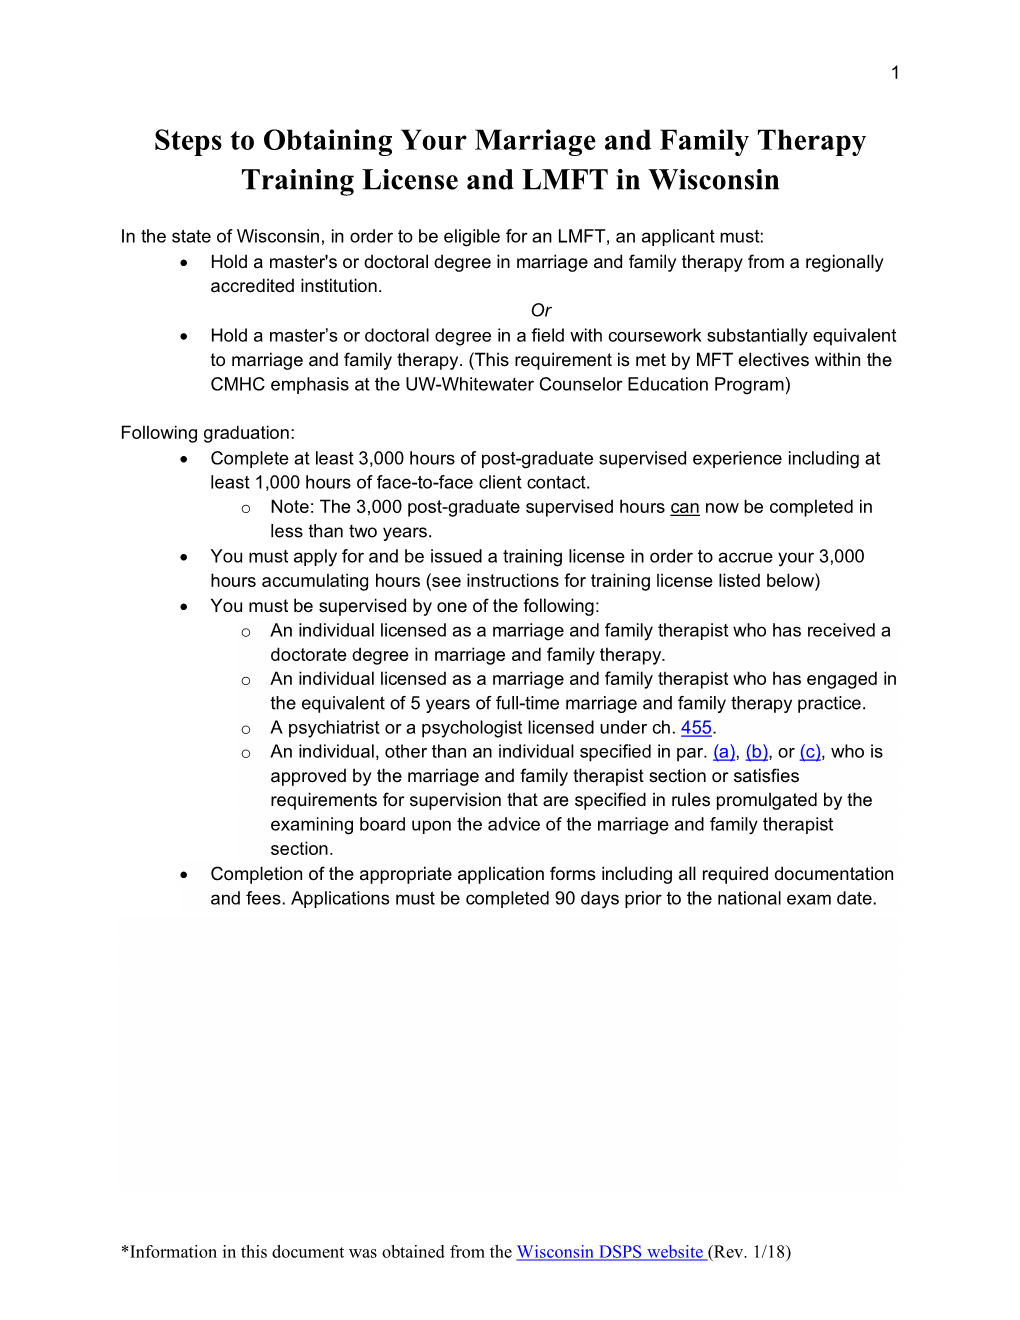 Steps to Obtaining Your Marriage and Family Therapy Training License and LMFT in Wisconsin